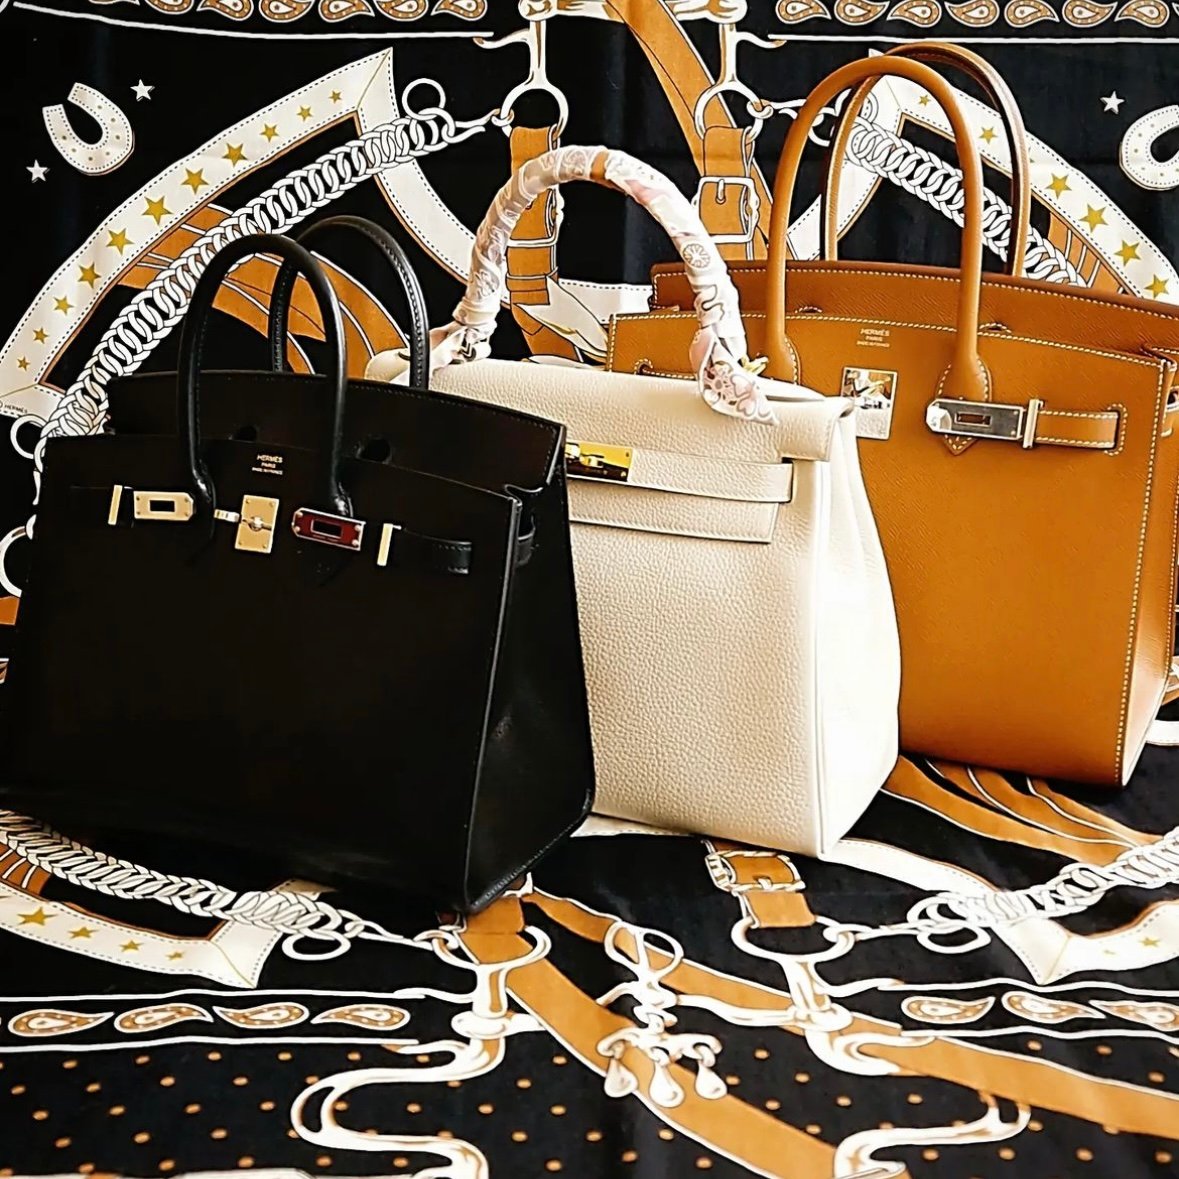 Part 1: Has The Value of Birkins and Kellys Declined? - PurseBop